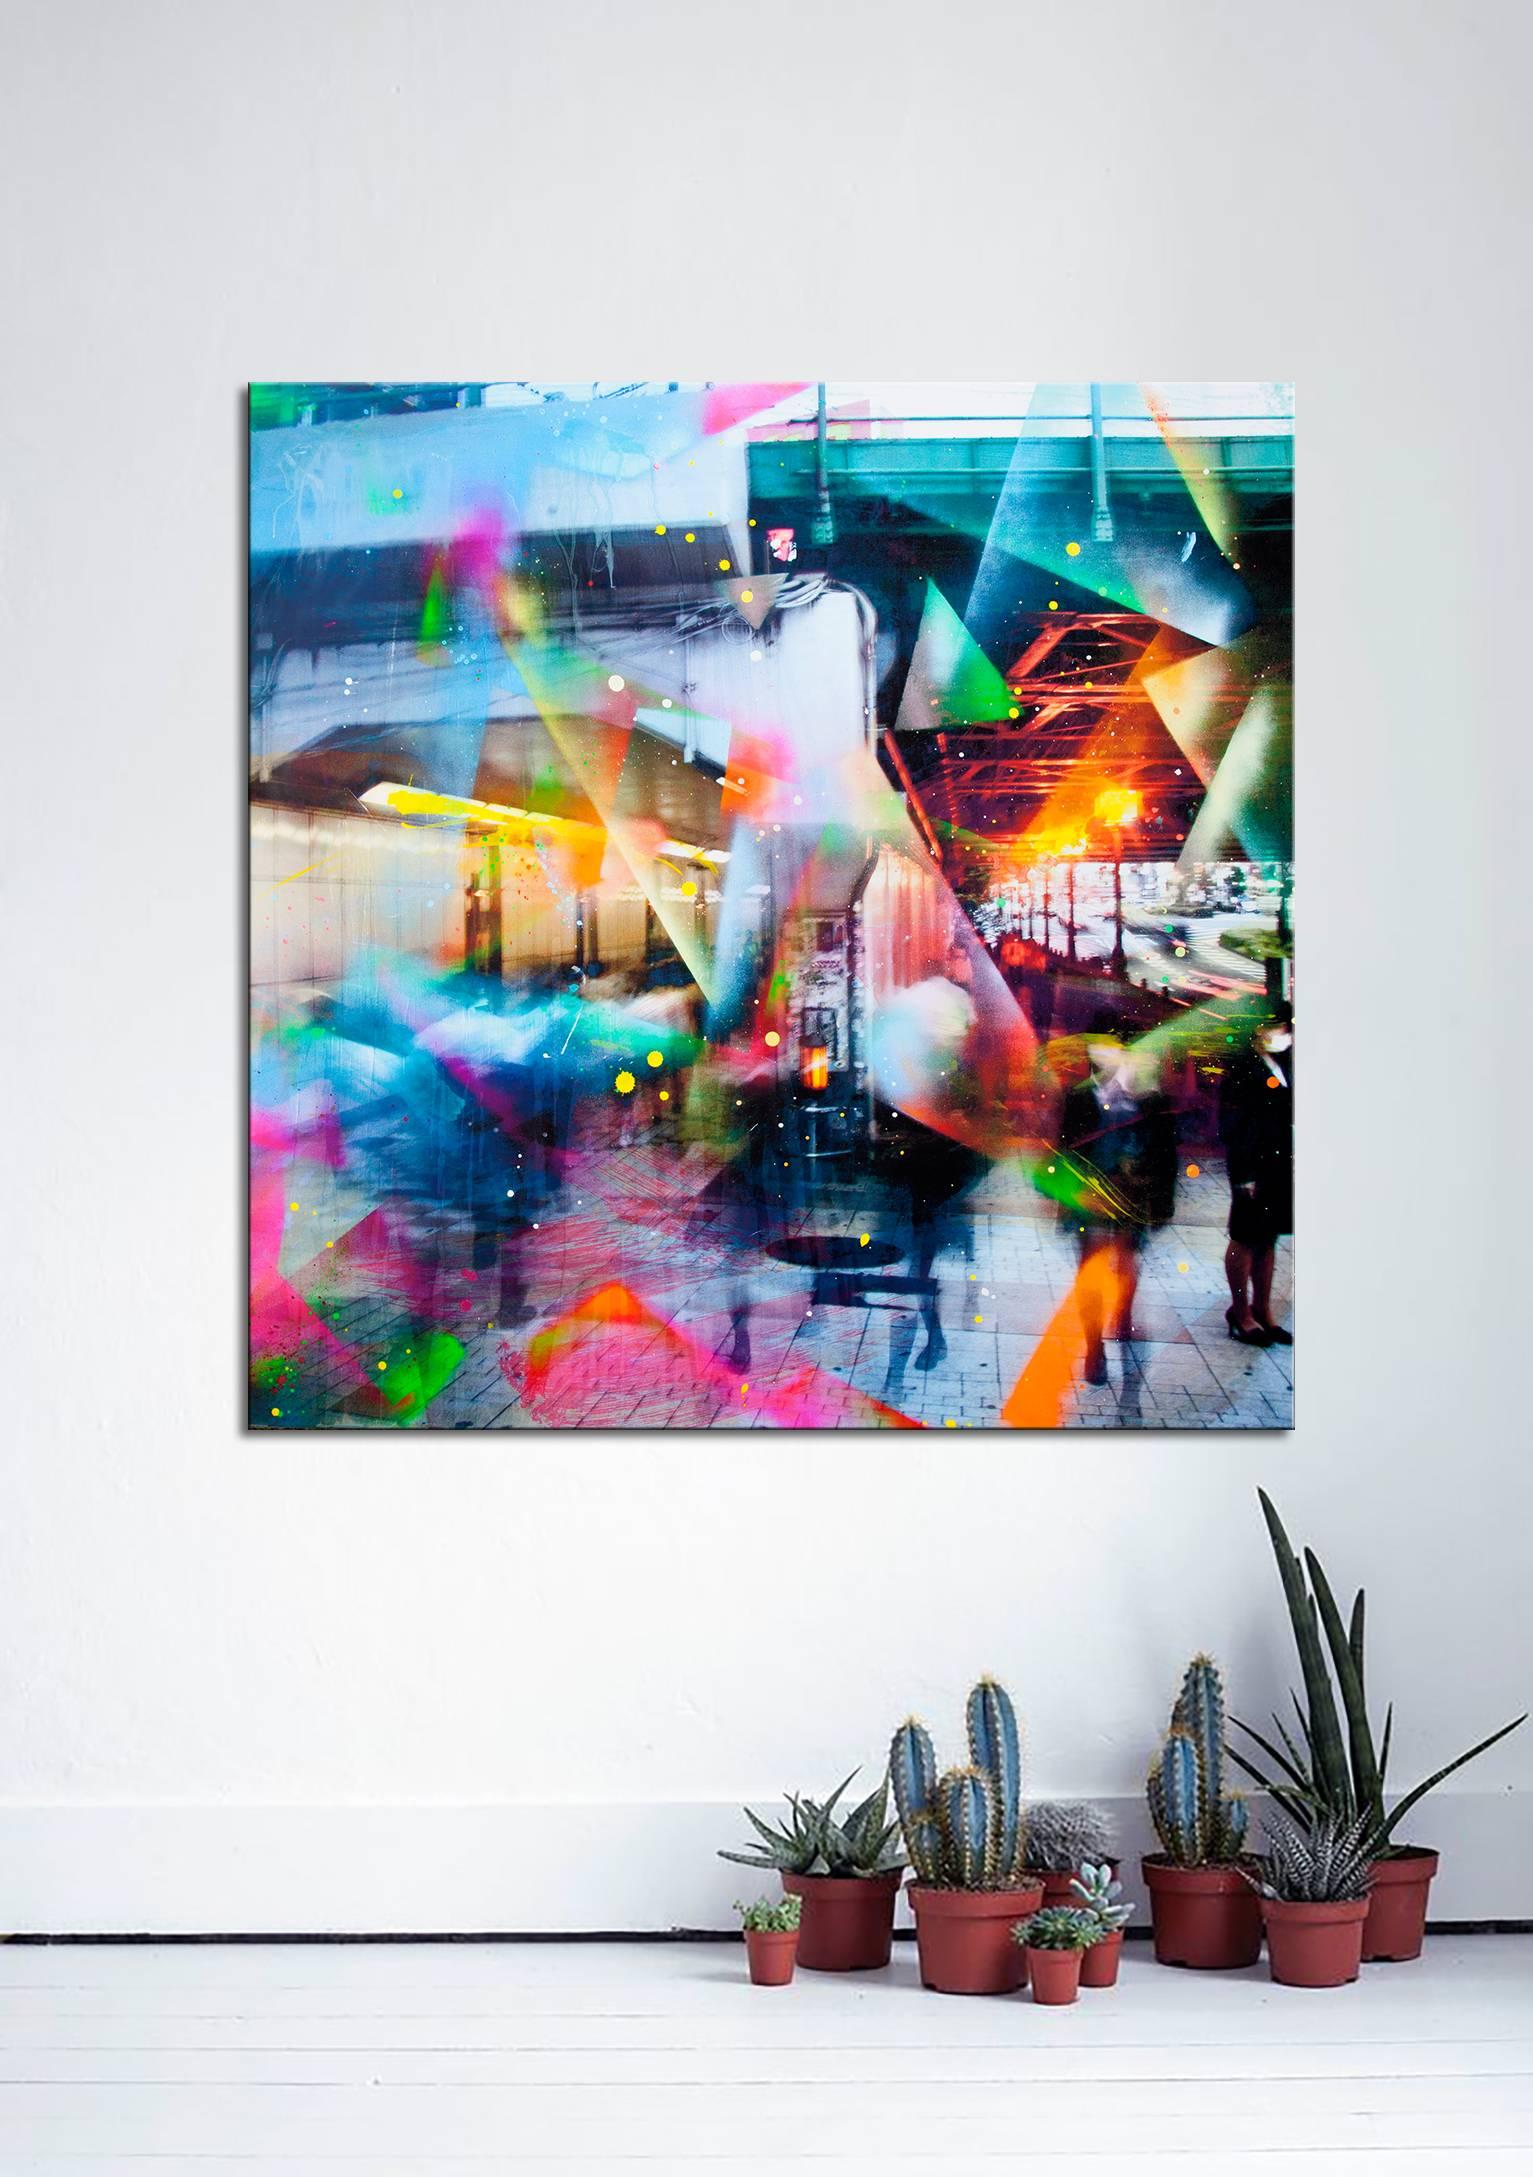 Tokyo # 6, Hand-painted photography, resin coated, bright bold color palette